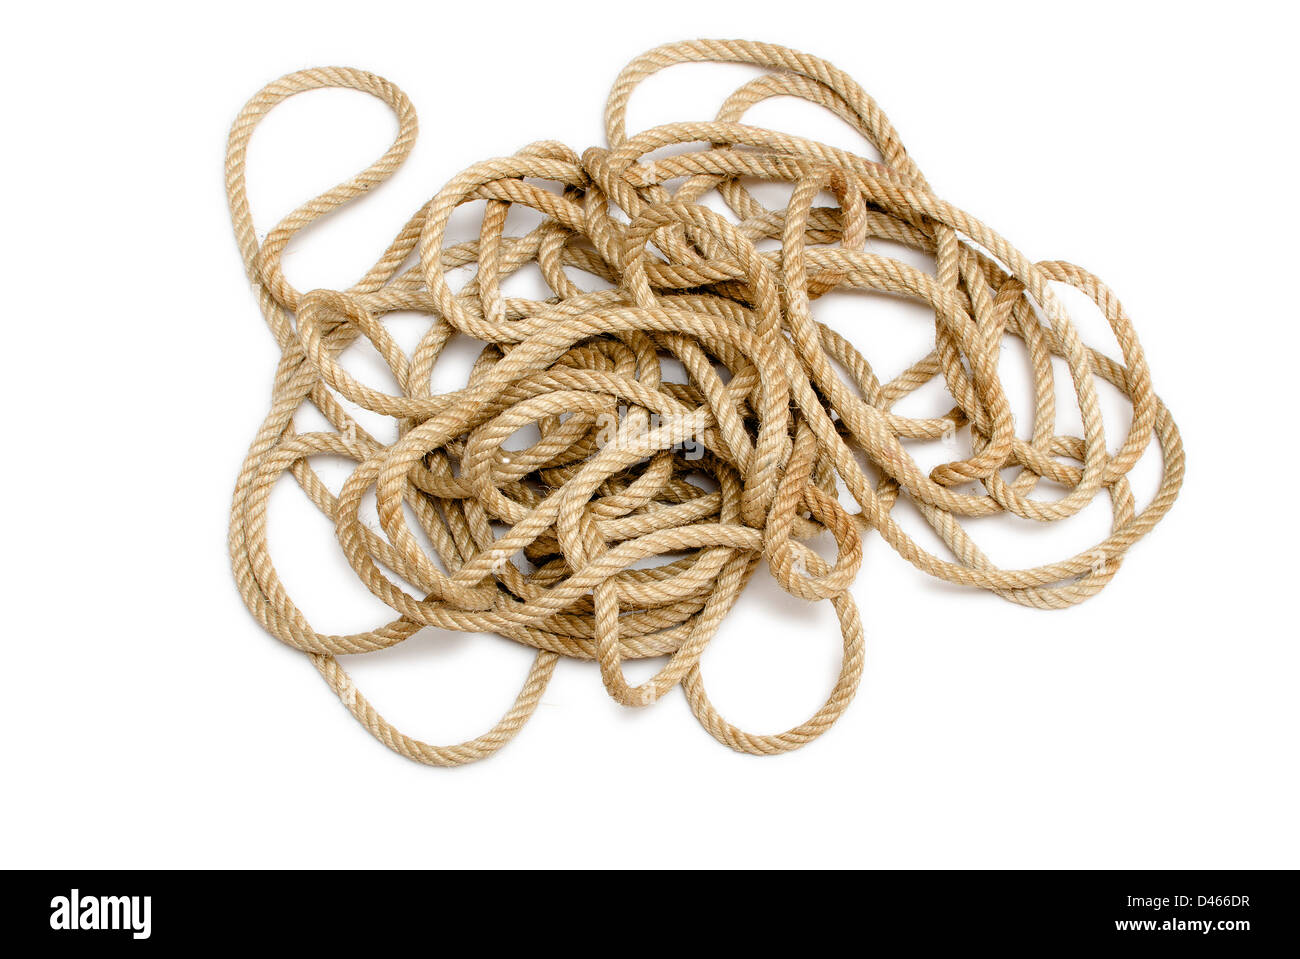 Corde Mess against white background Banque D'Images